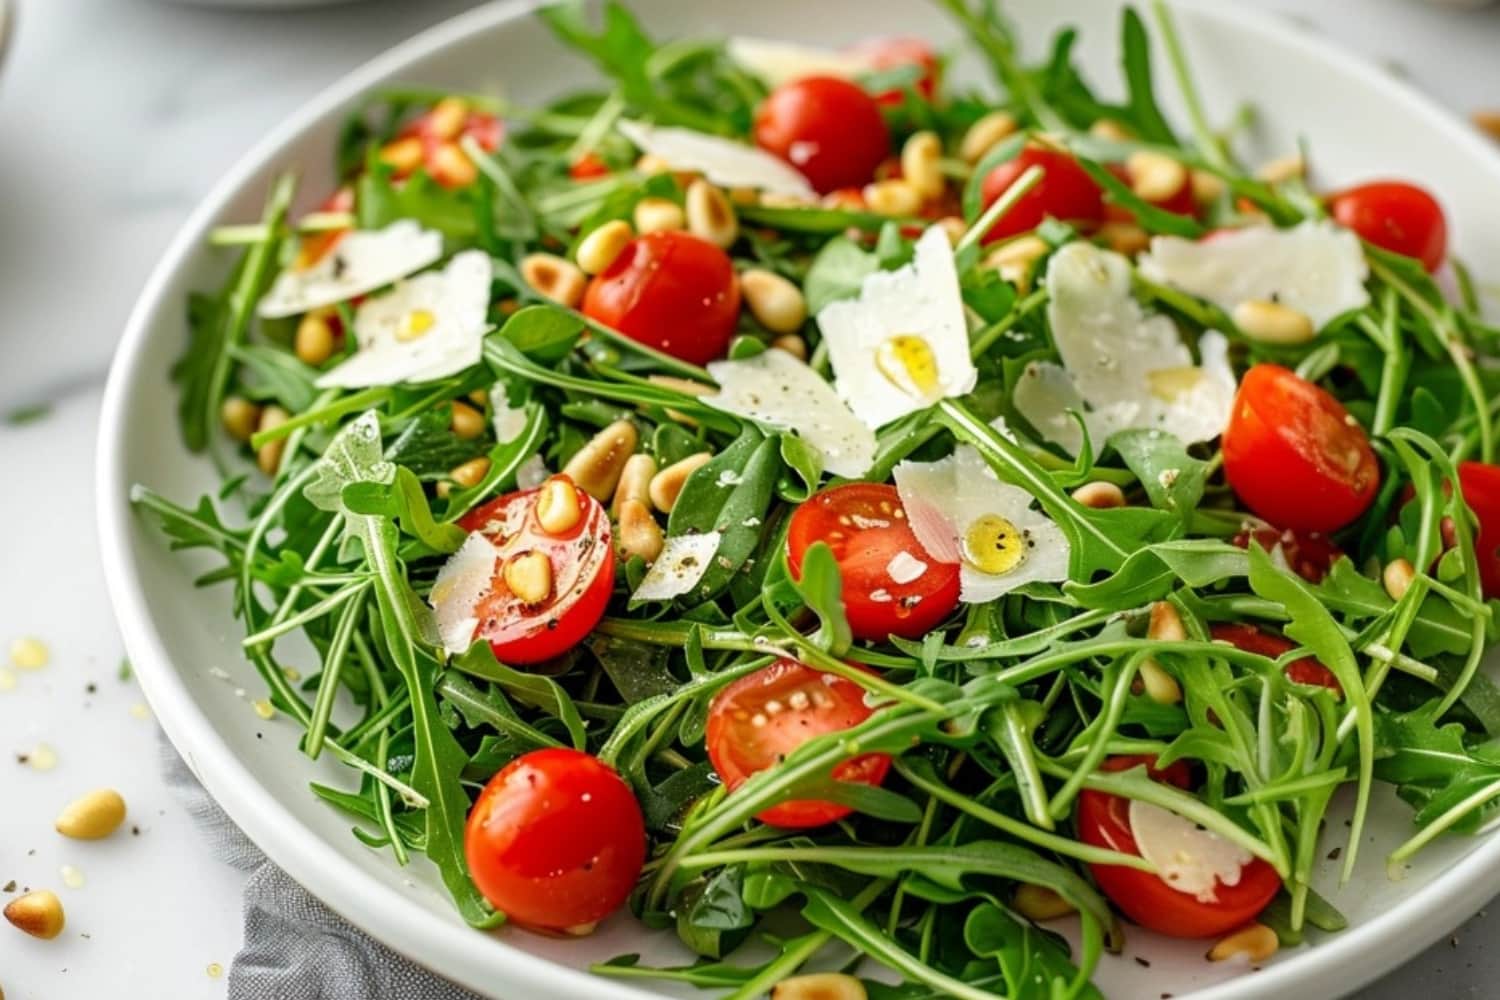 Fresh arugula salad on a white plate with nuts, cherry tomatoes drizzled with lemon dressing.